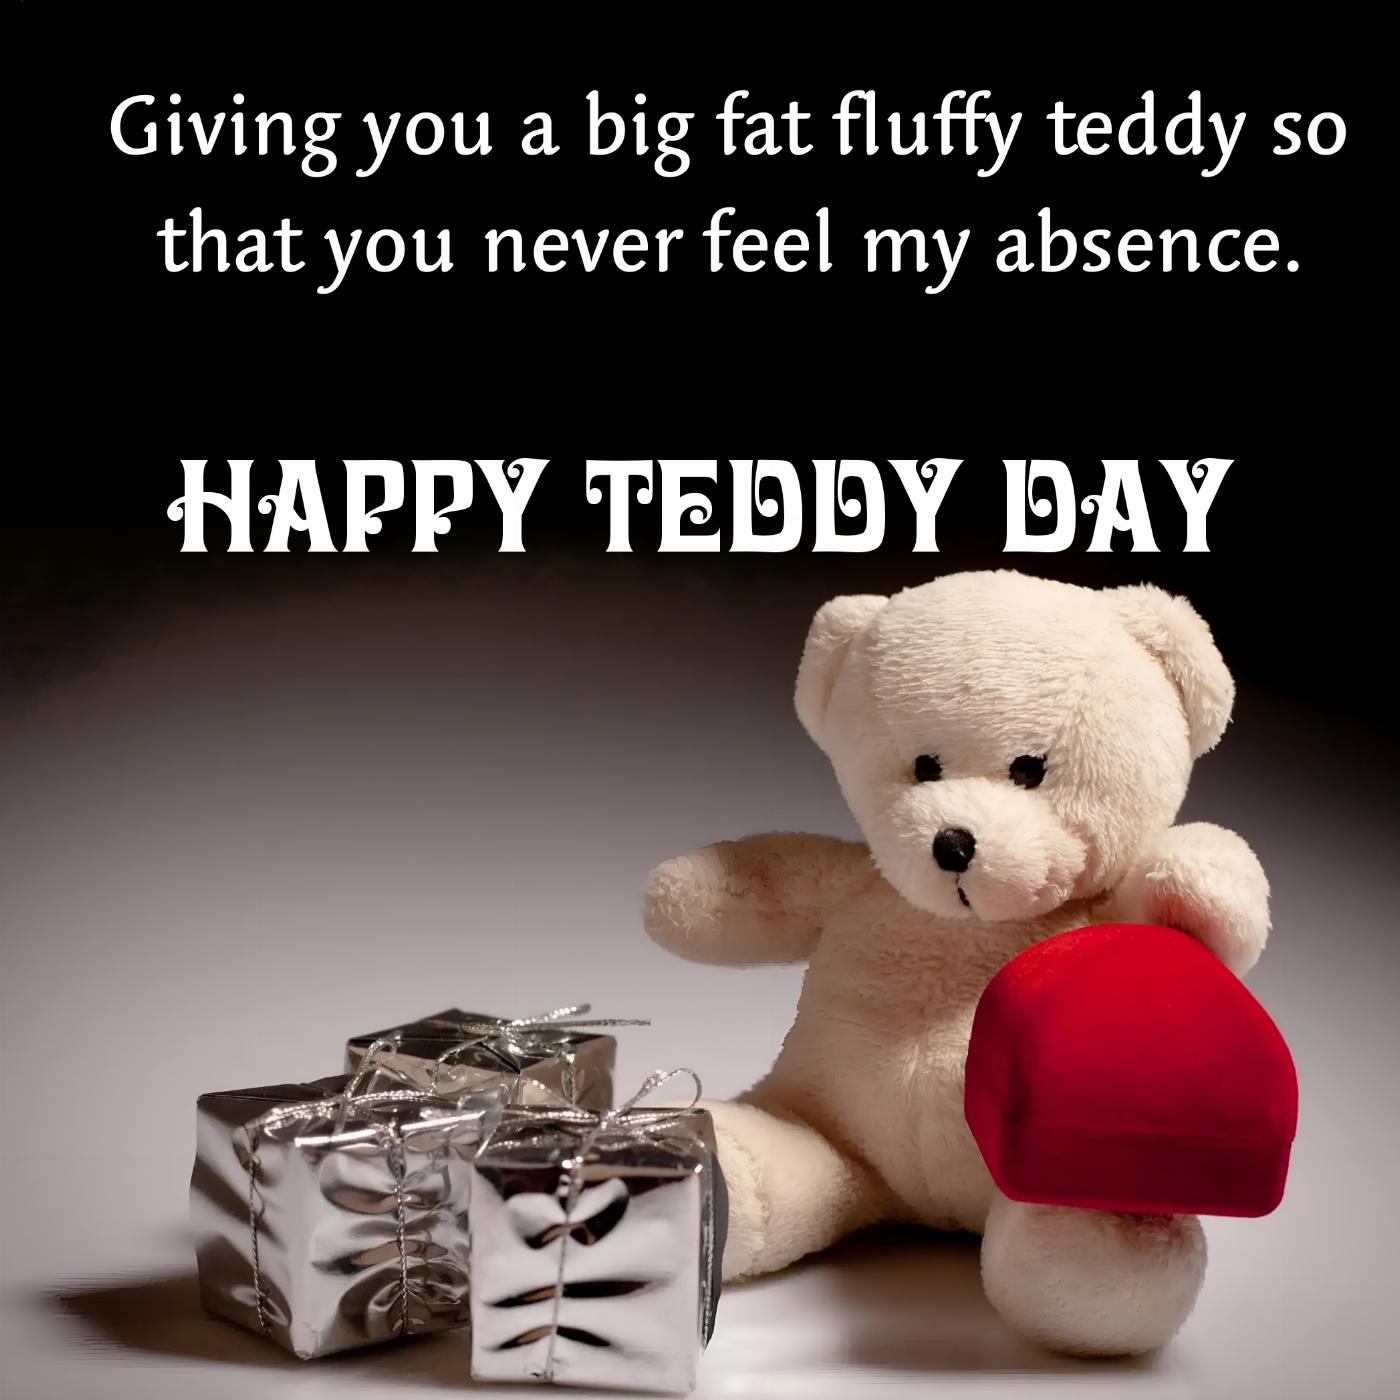 Giving you a big fat fluffy teddy so that you never feel my absence